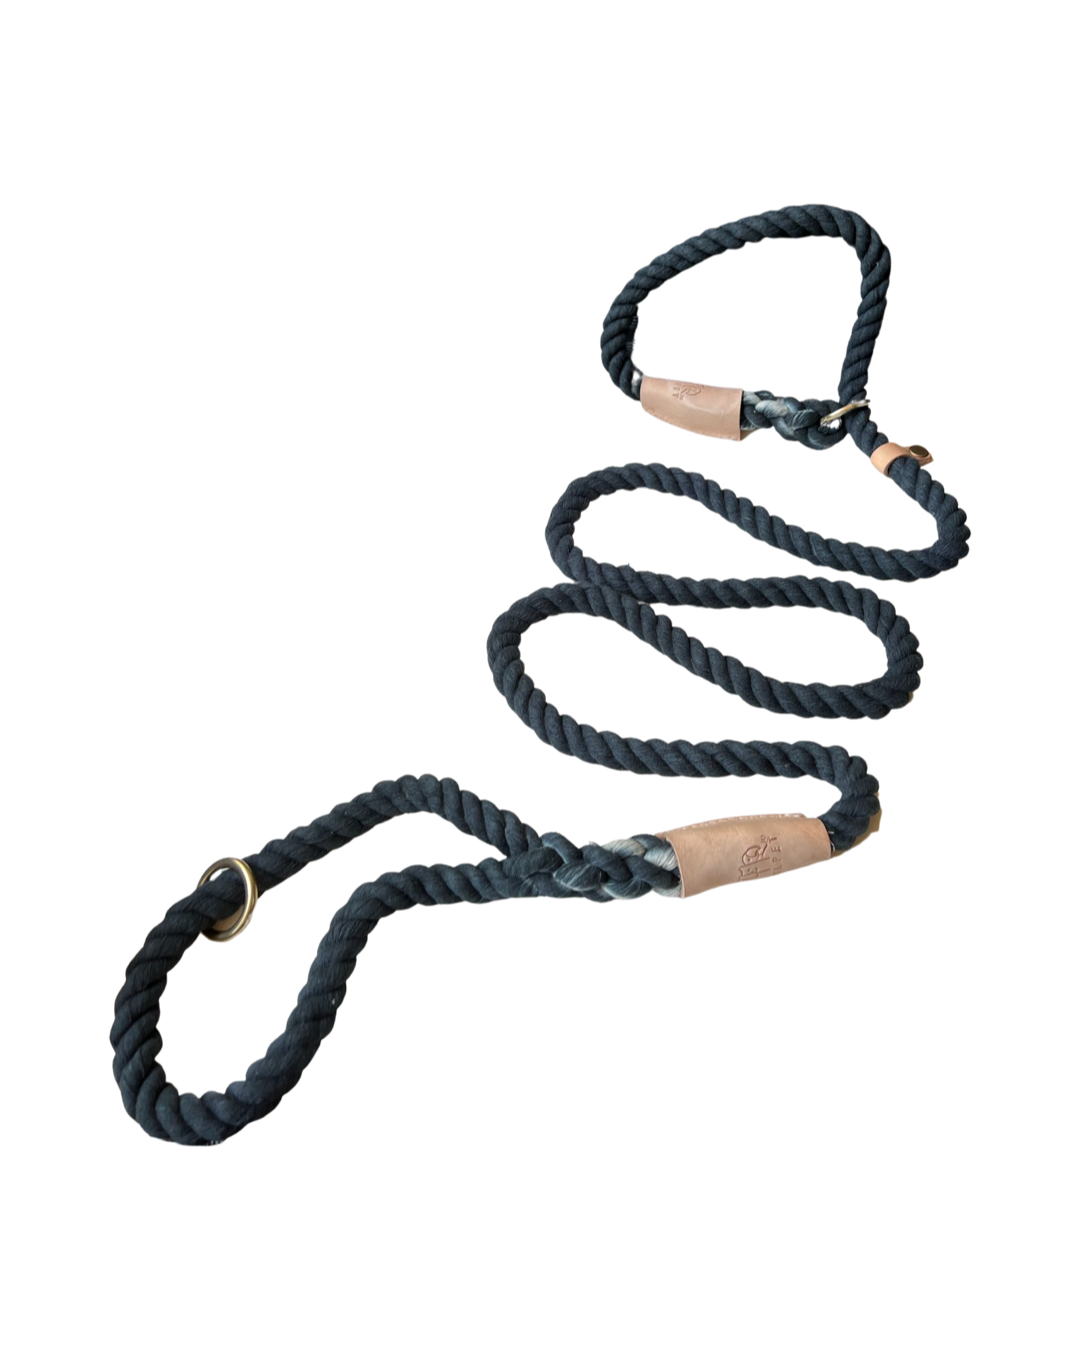 Eco Friendly Organic Cotton Durable Thick Slip Dog Rope Leash with Vegan Leather